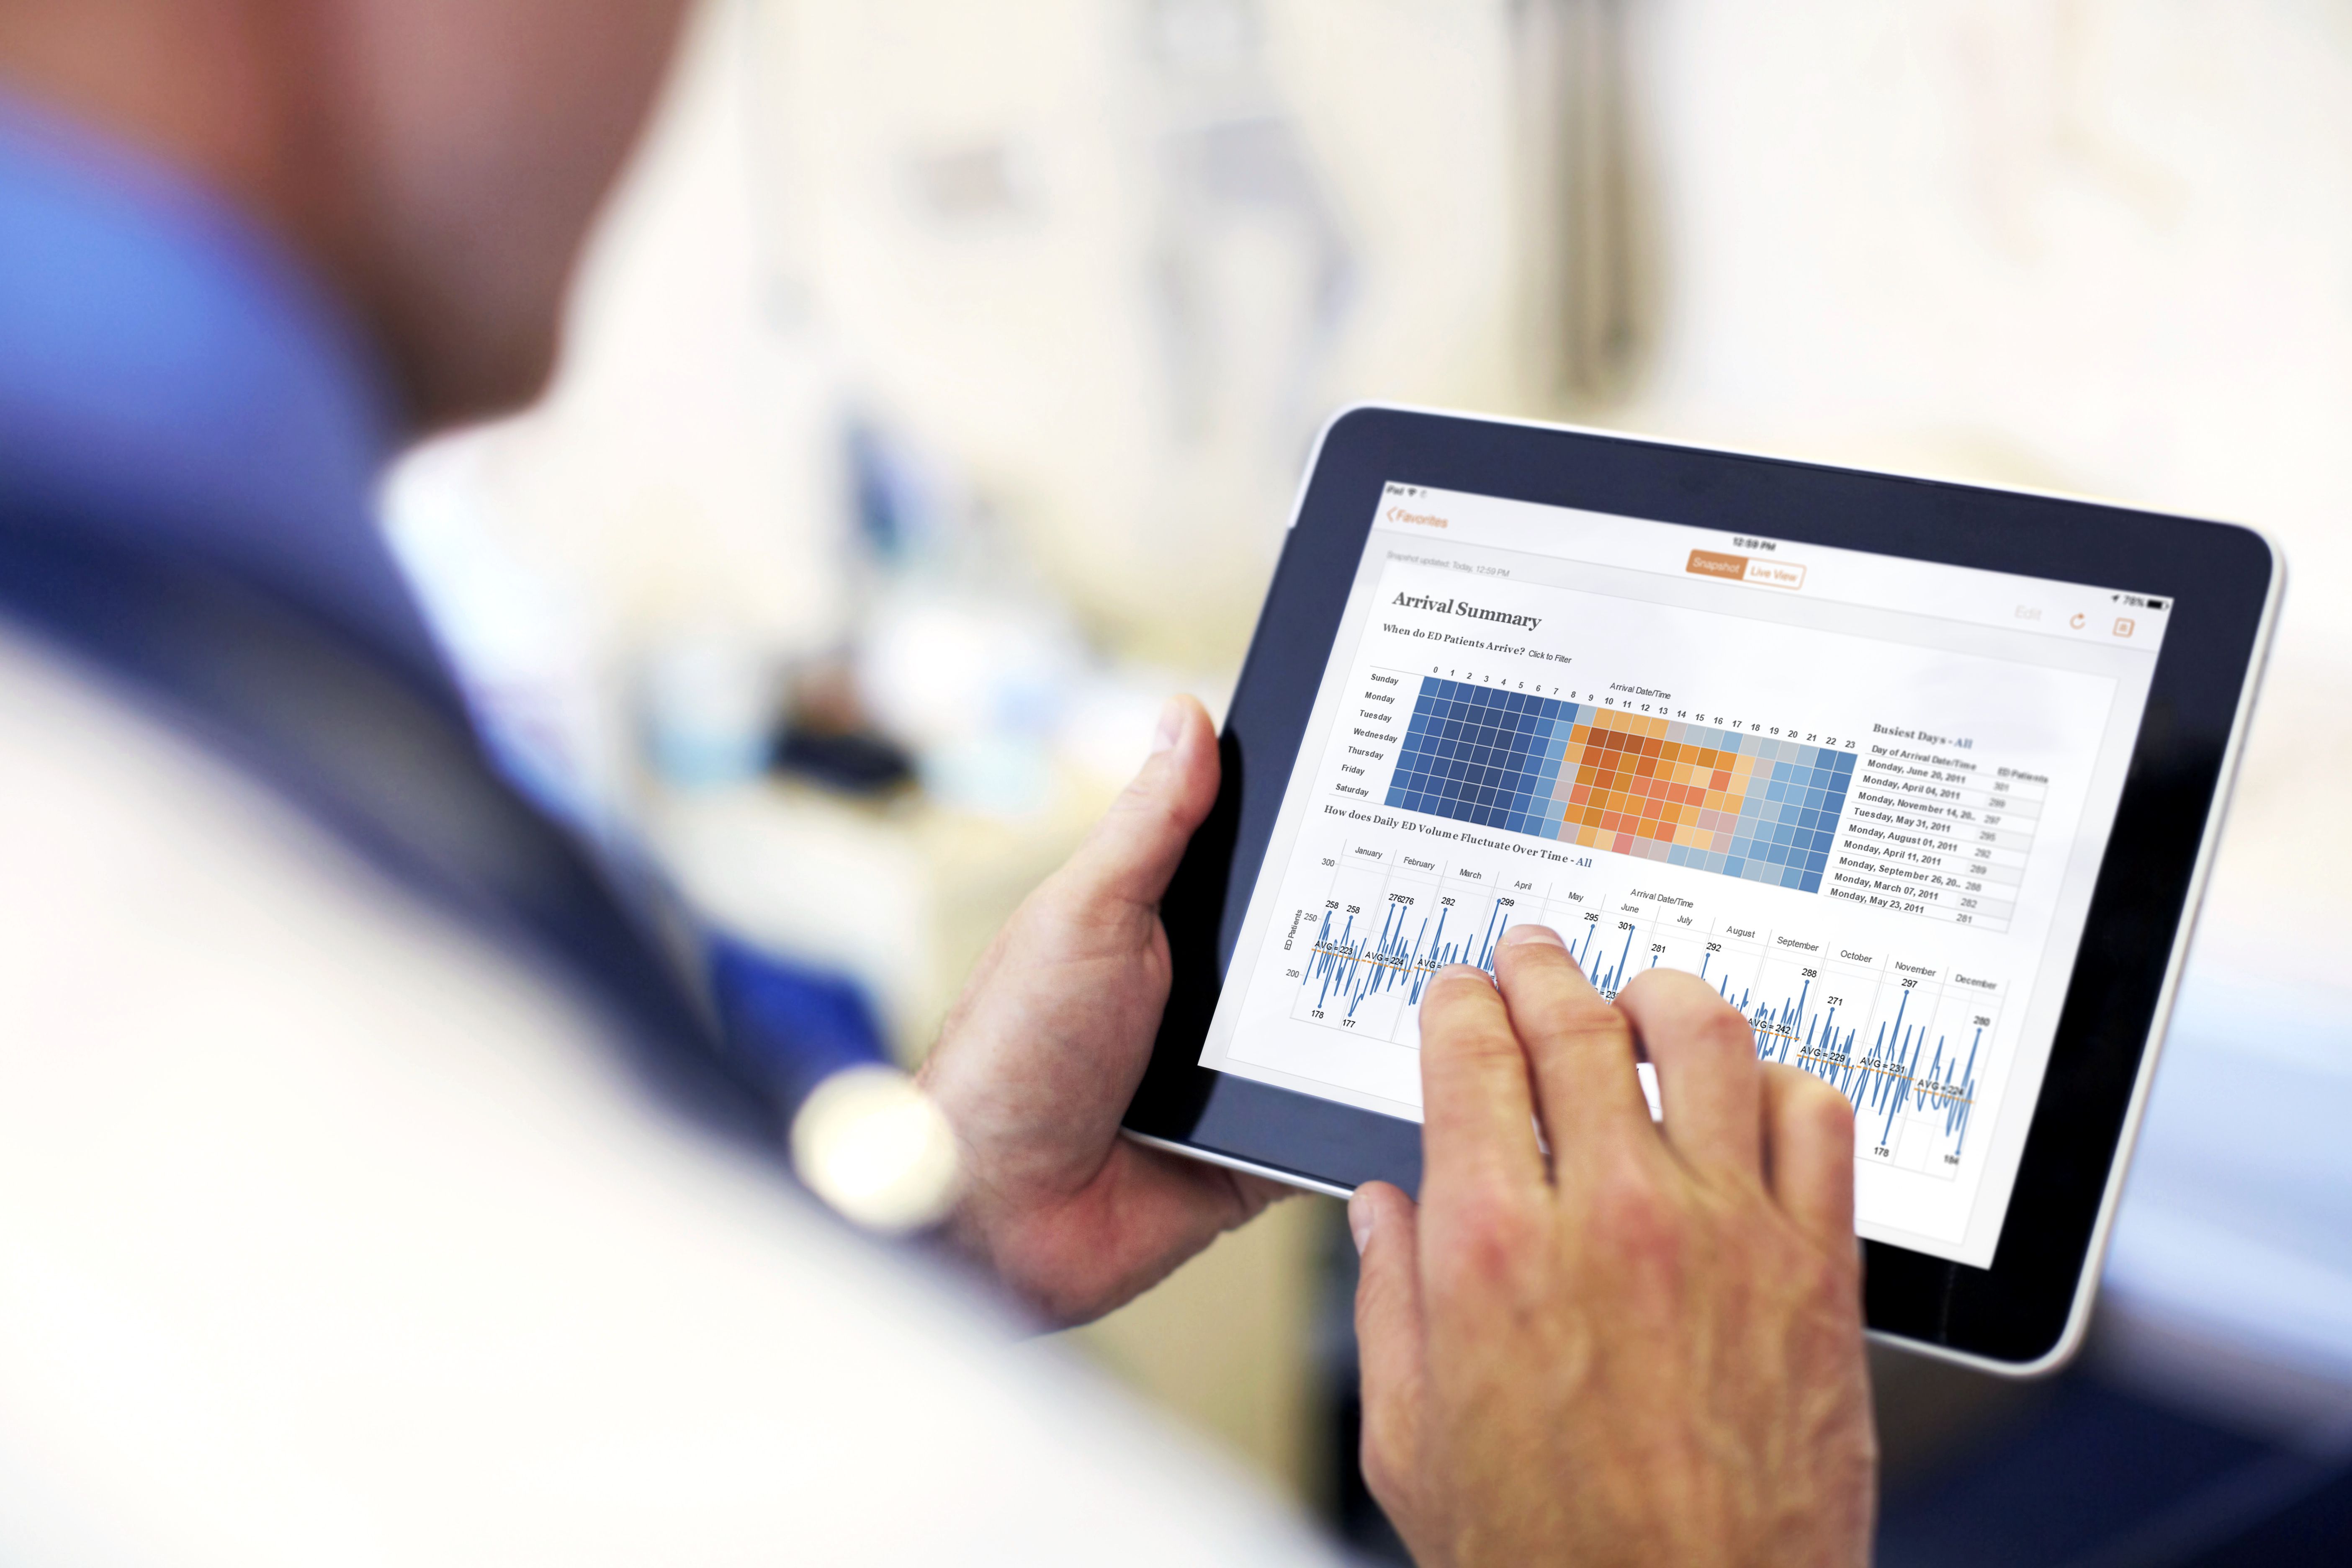 4 ways data is improving healthcare operations